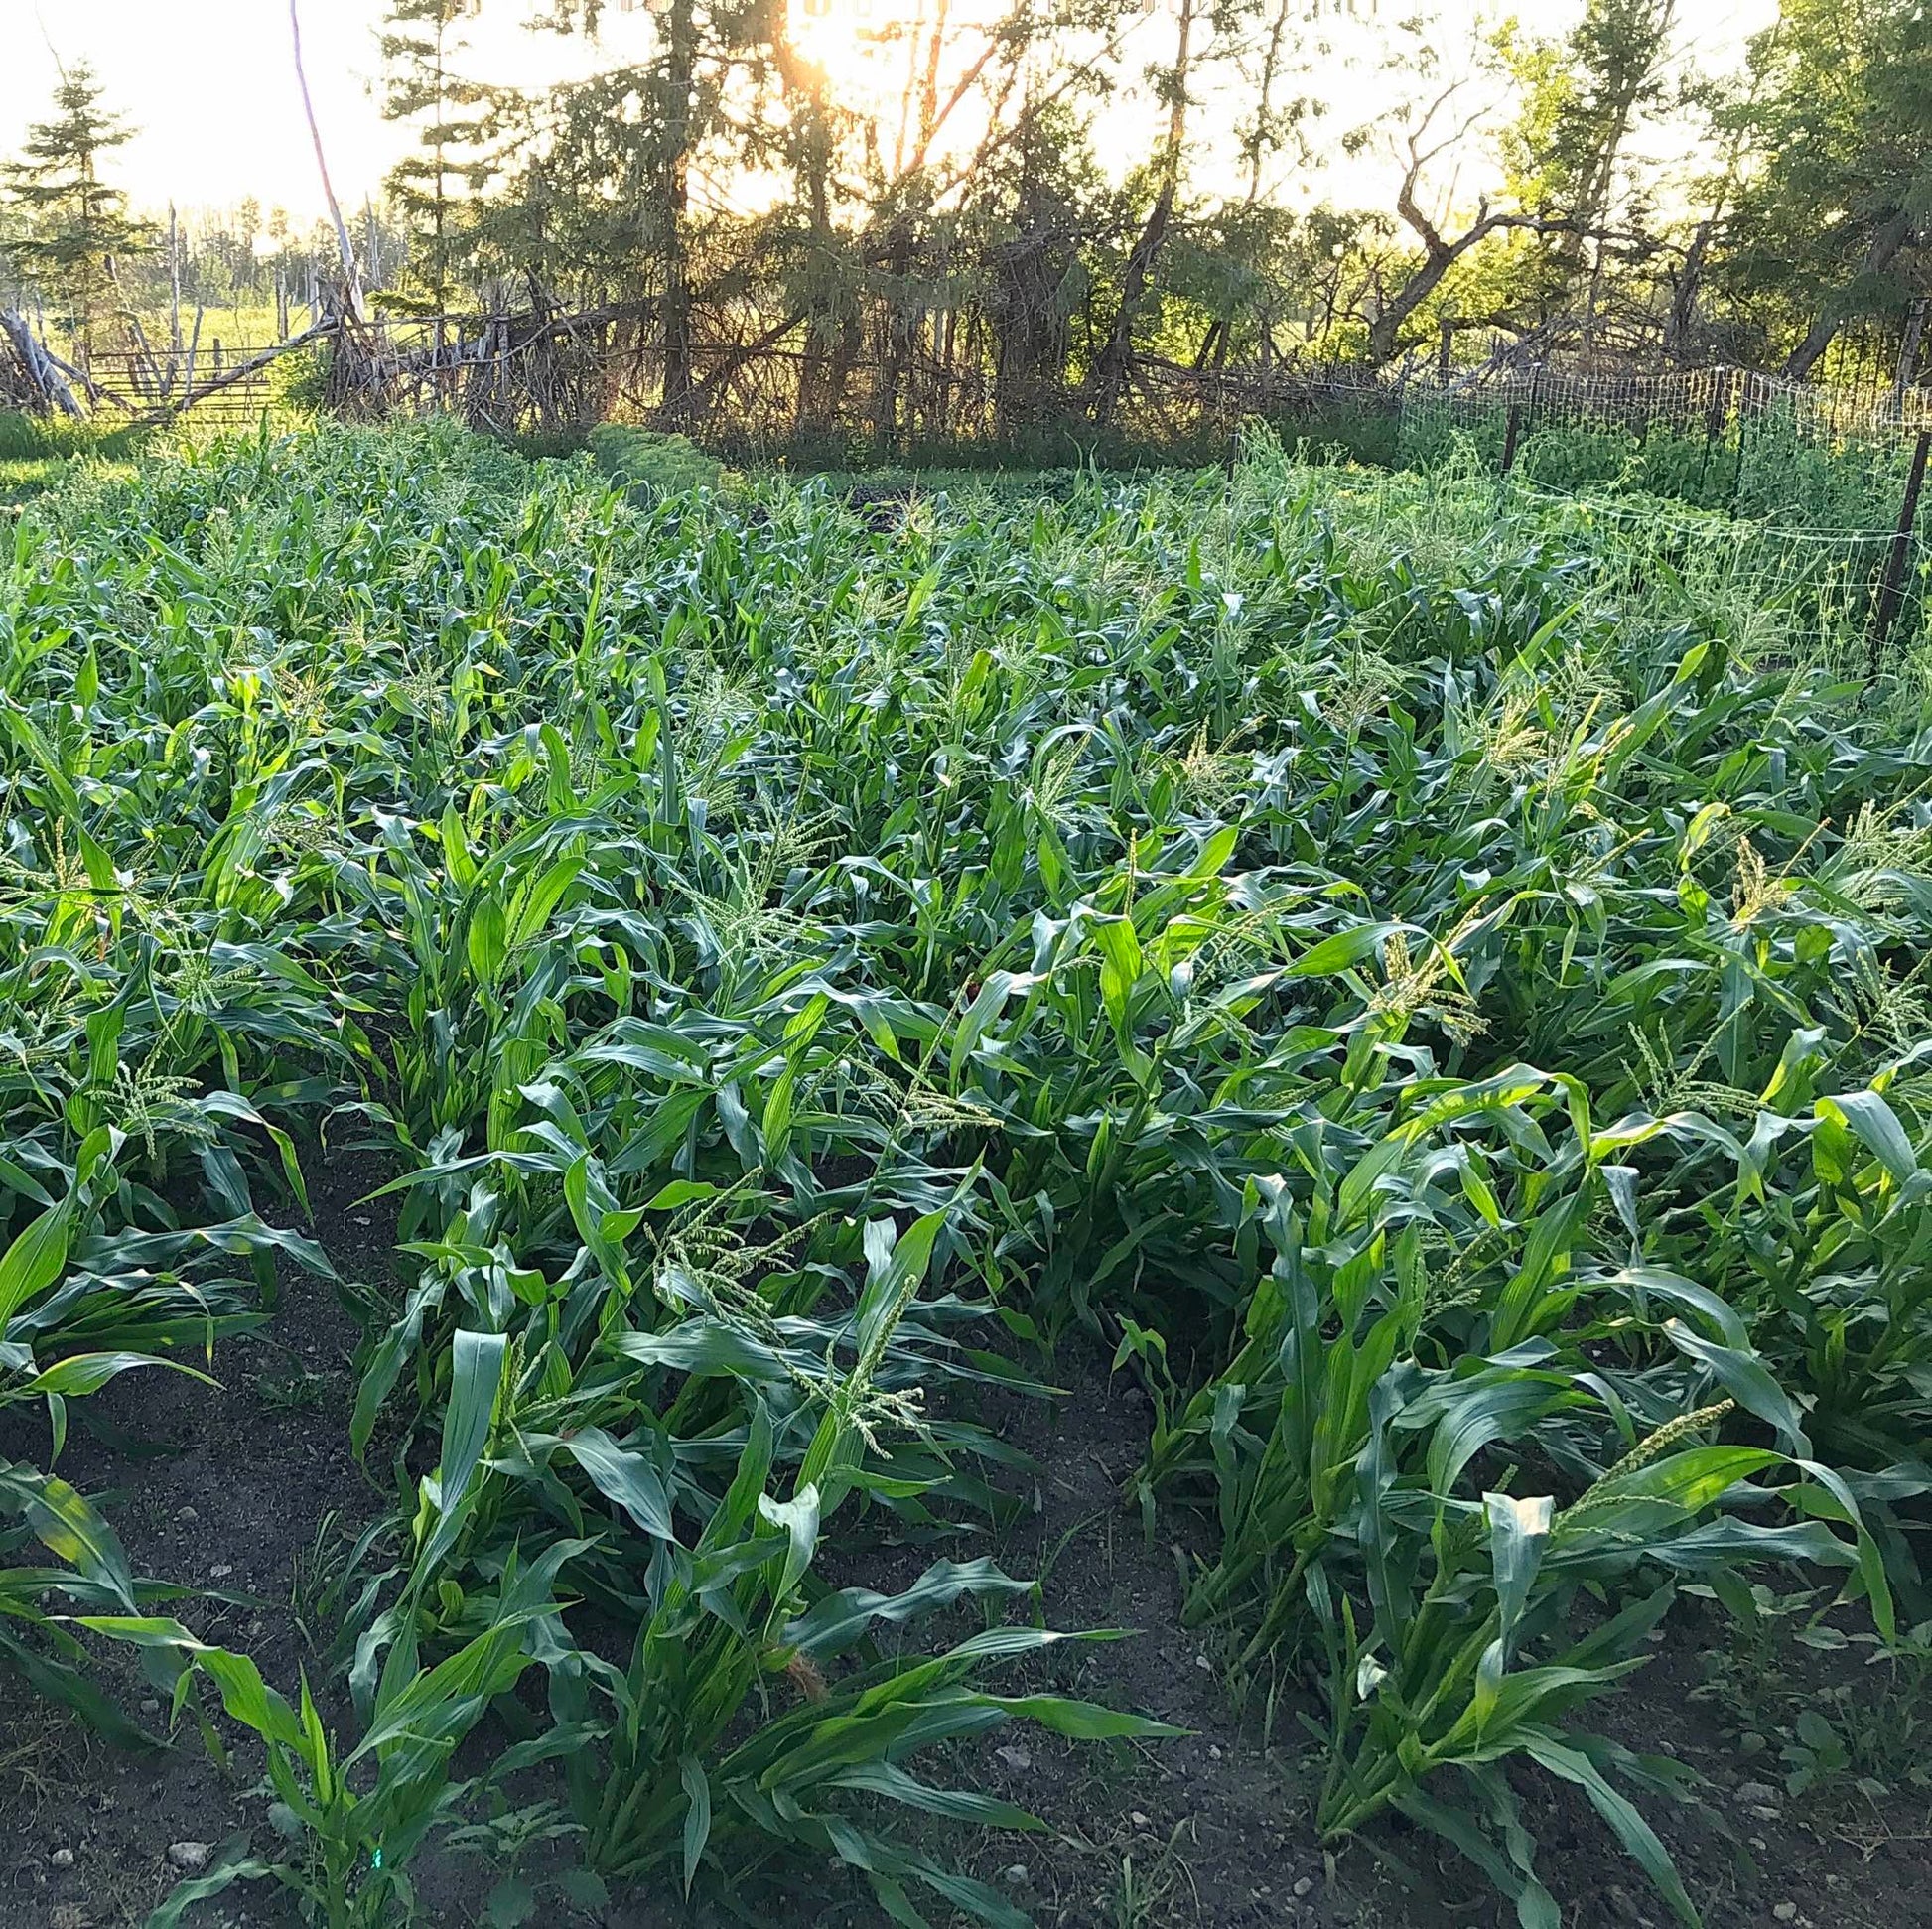 Rows of dwarf corn plants in the evening light before sunset.